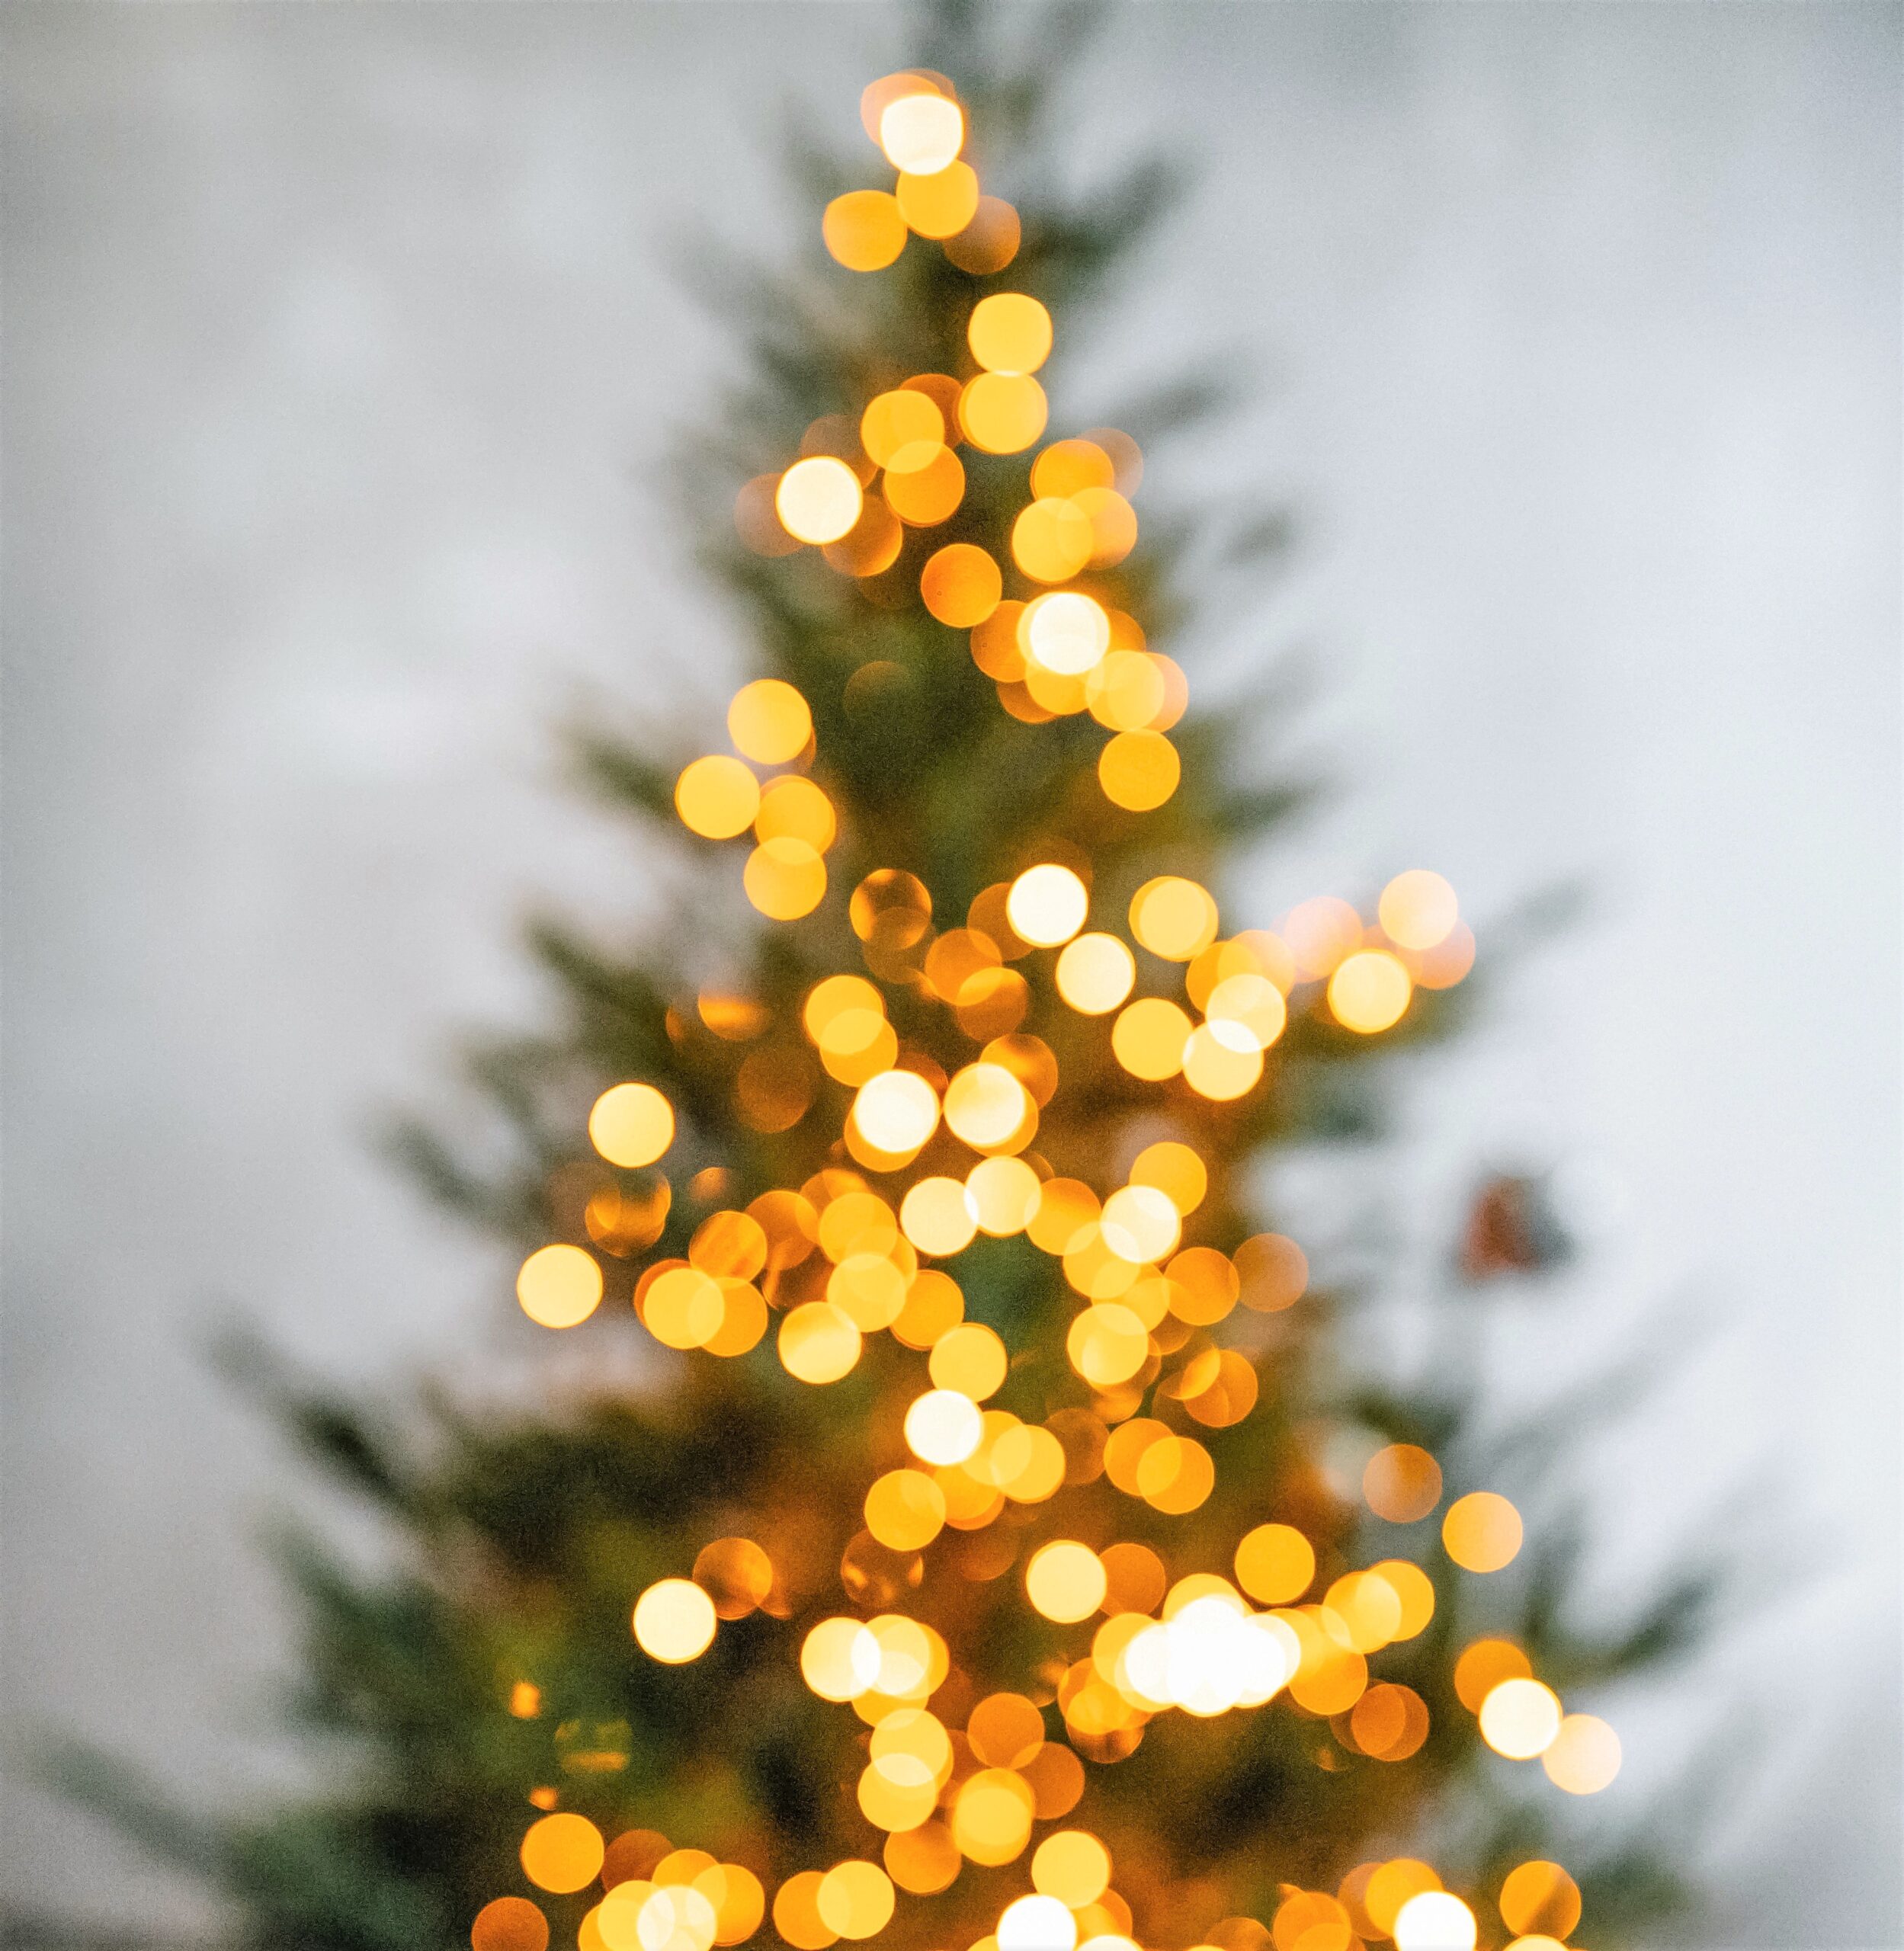 A Blurry tree is illuminated with tiny bright lights warming up the room in the background.